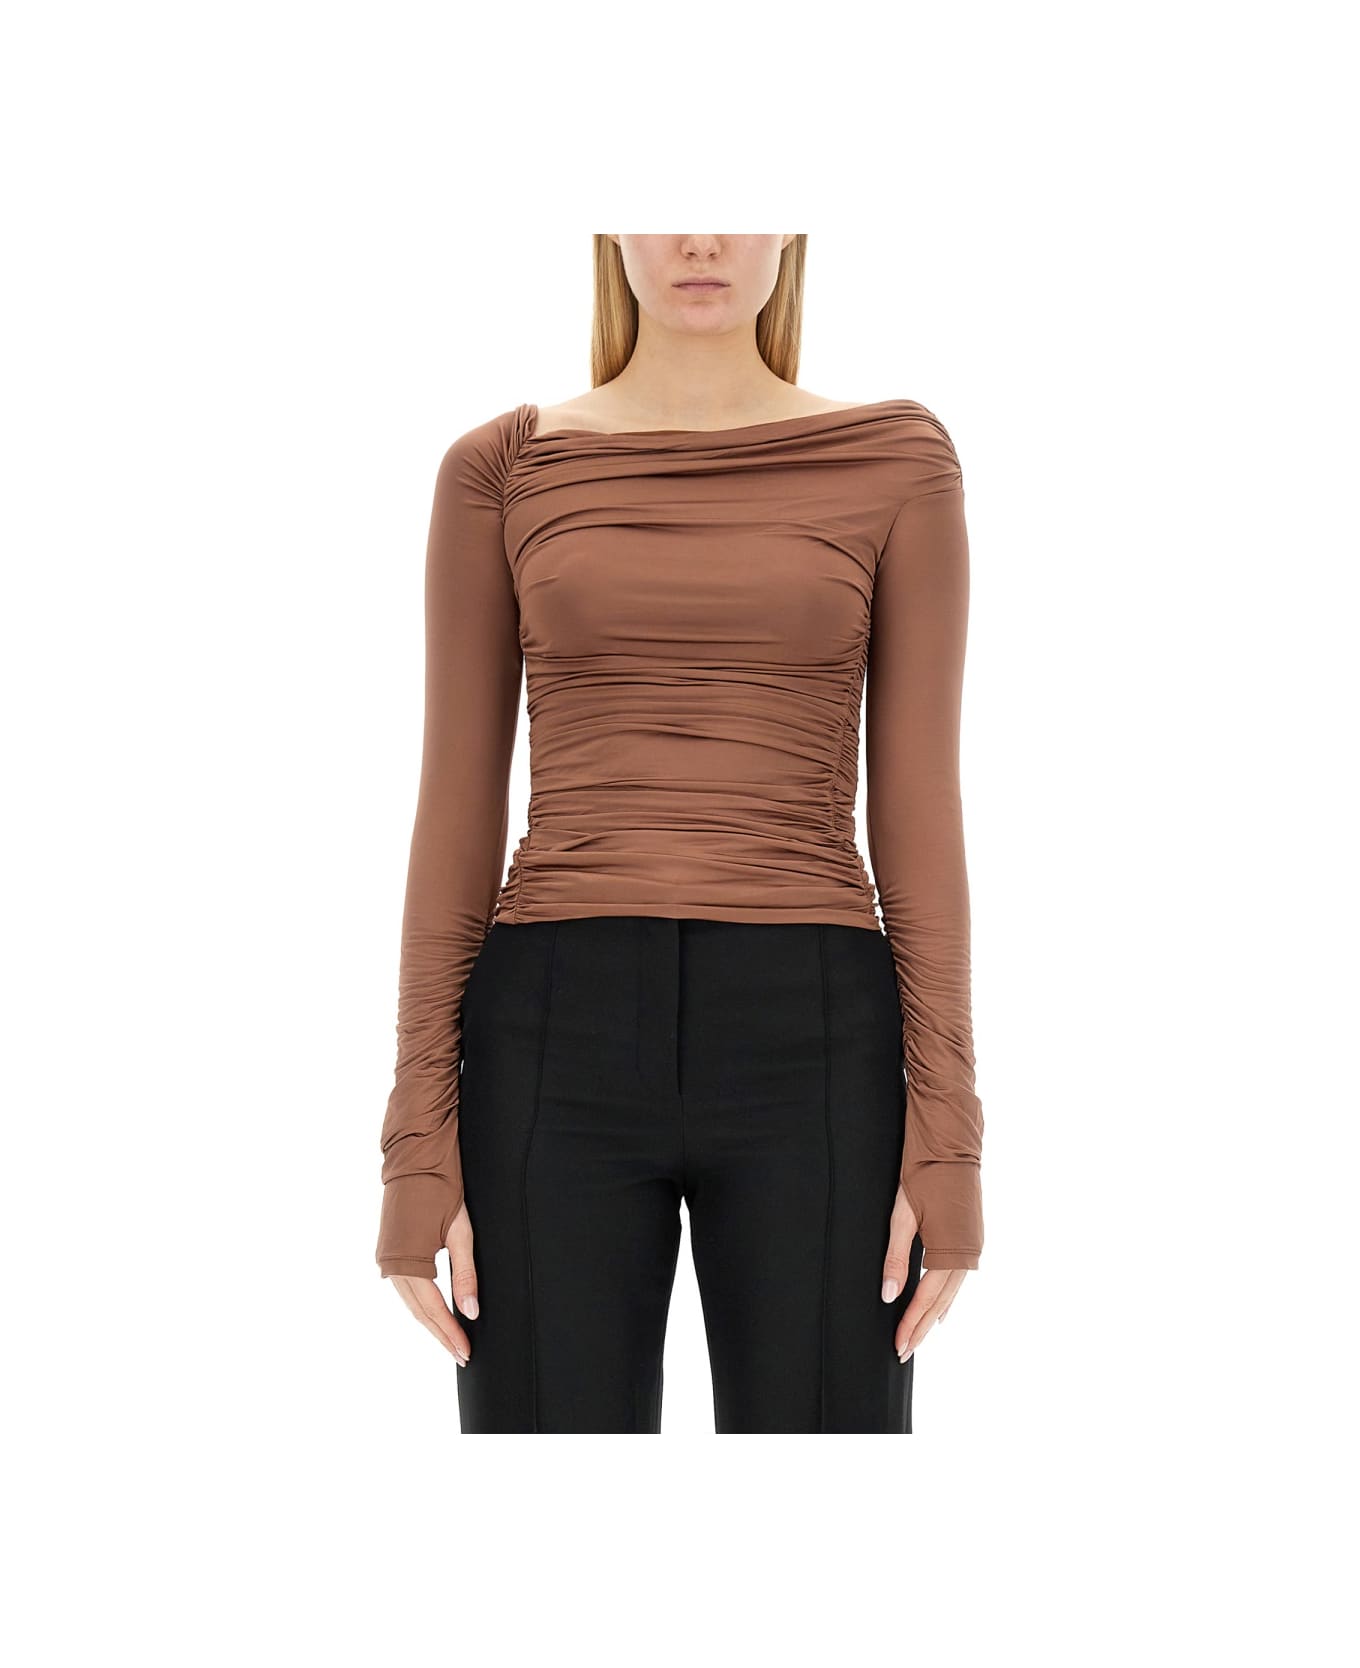 Helmut Lang Top With Ruffles - BEIGE